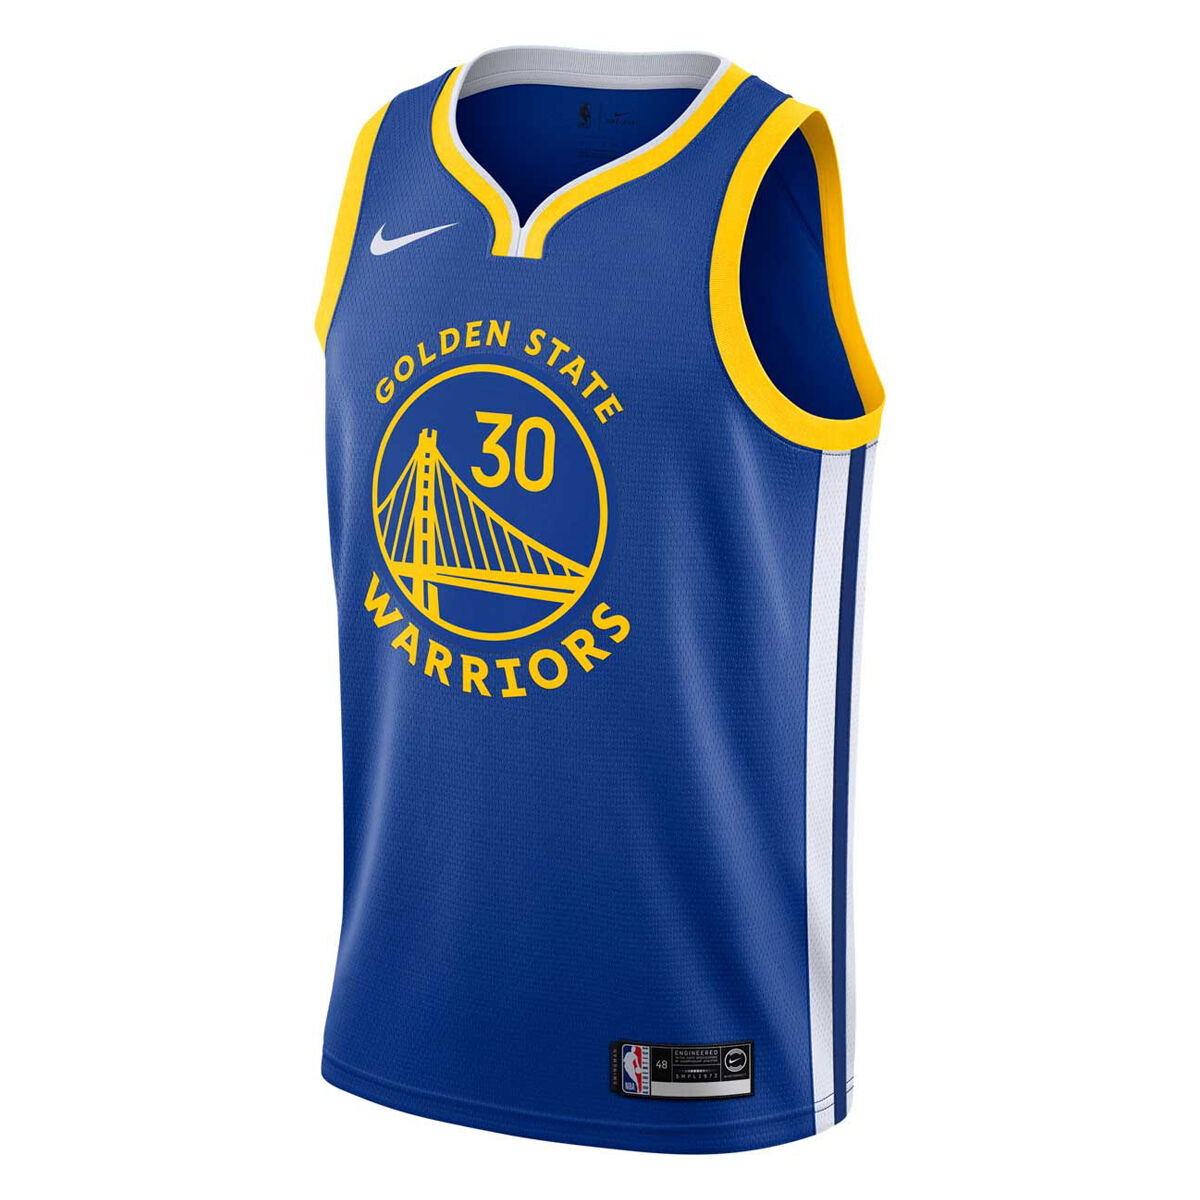 curry's jersey